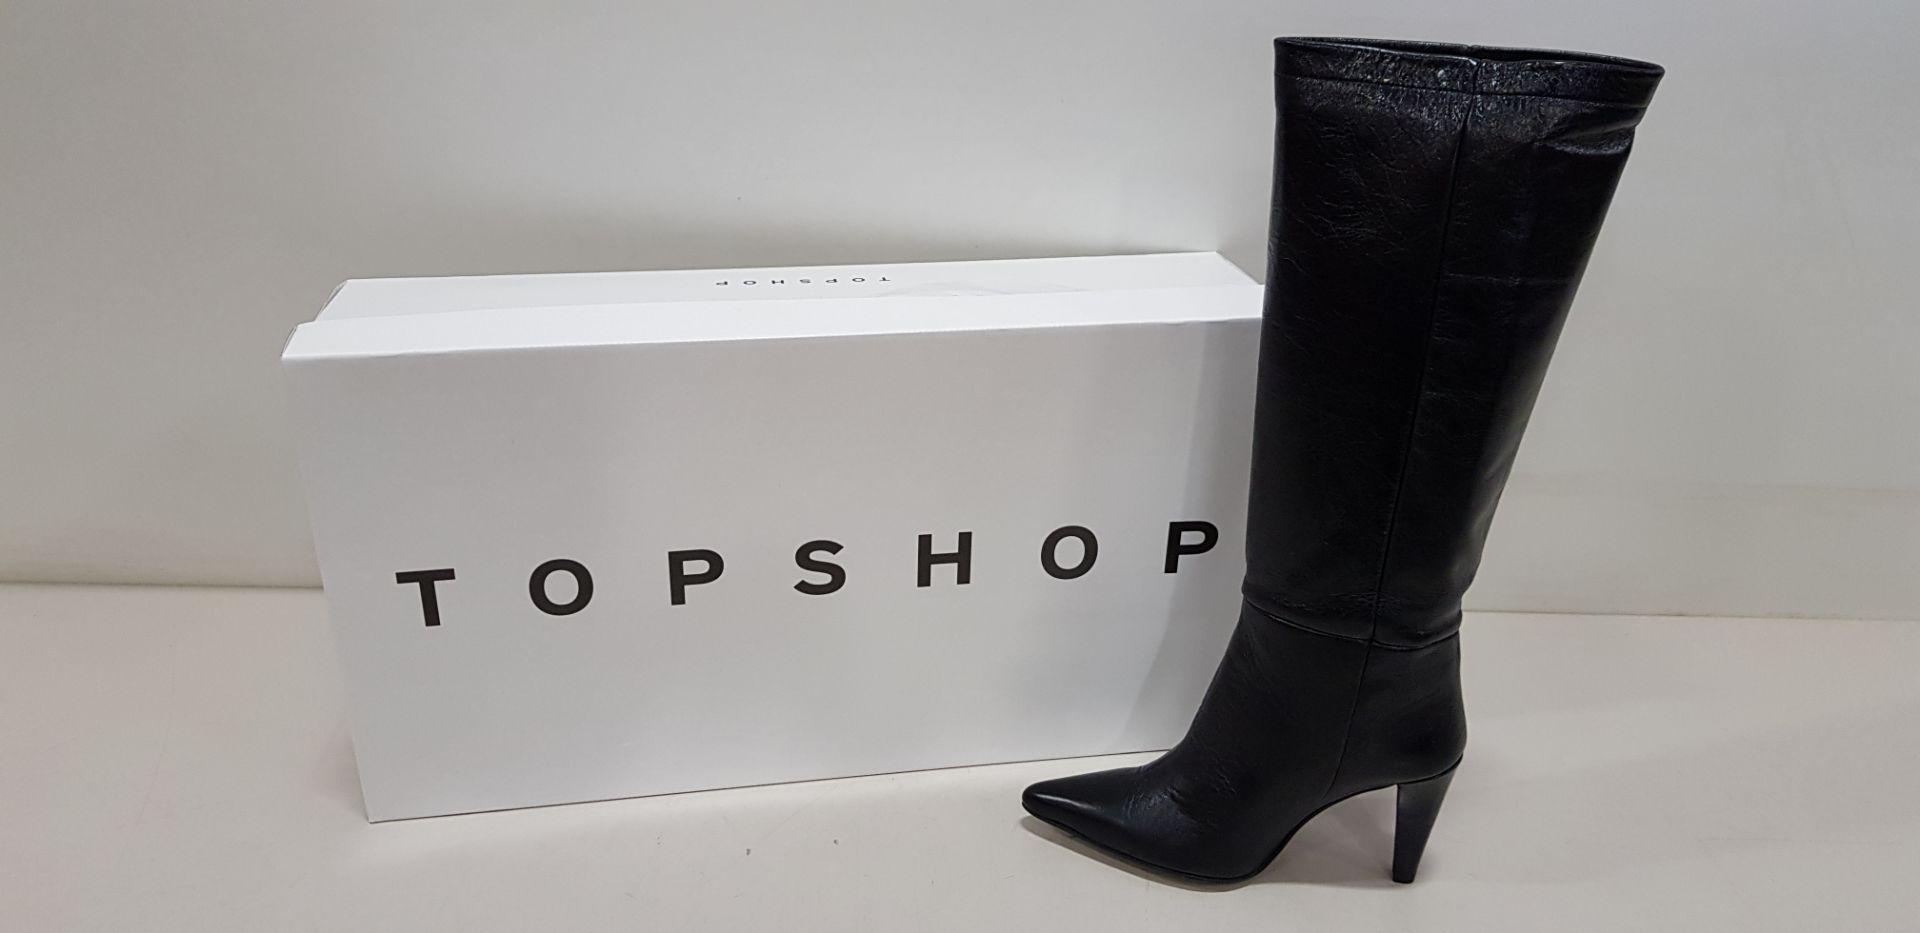 4 X BRAND NEW TOPSHOP TAYLOR BLACK KNEE HIGH HEELED BOOTS UK SIZE 7 RRP £120.00 (TOTAL RRP £480.00)